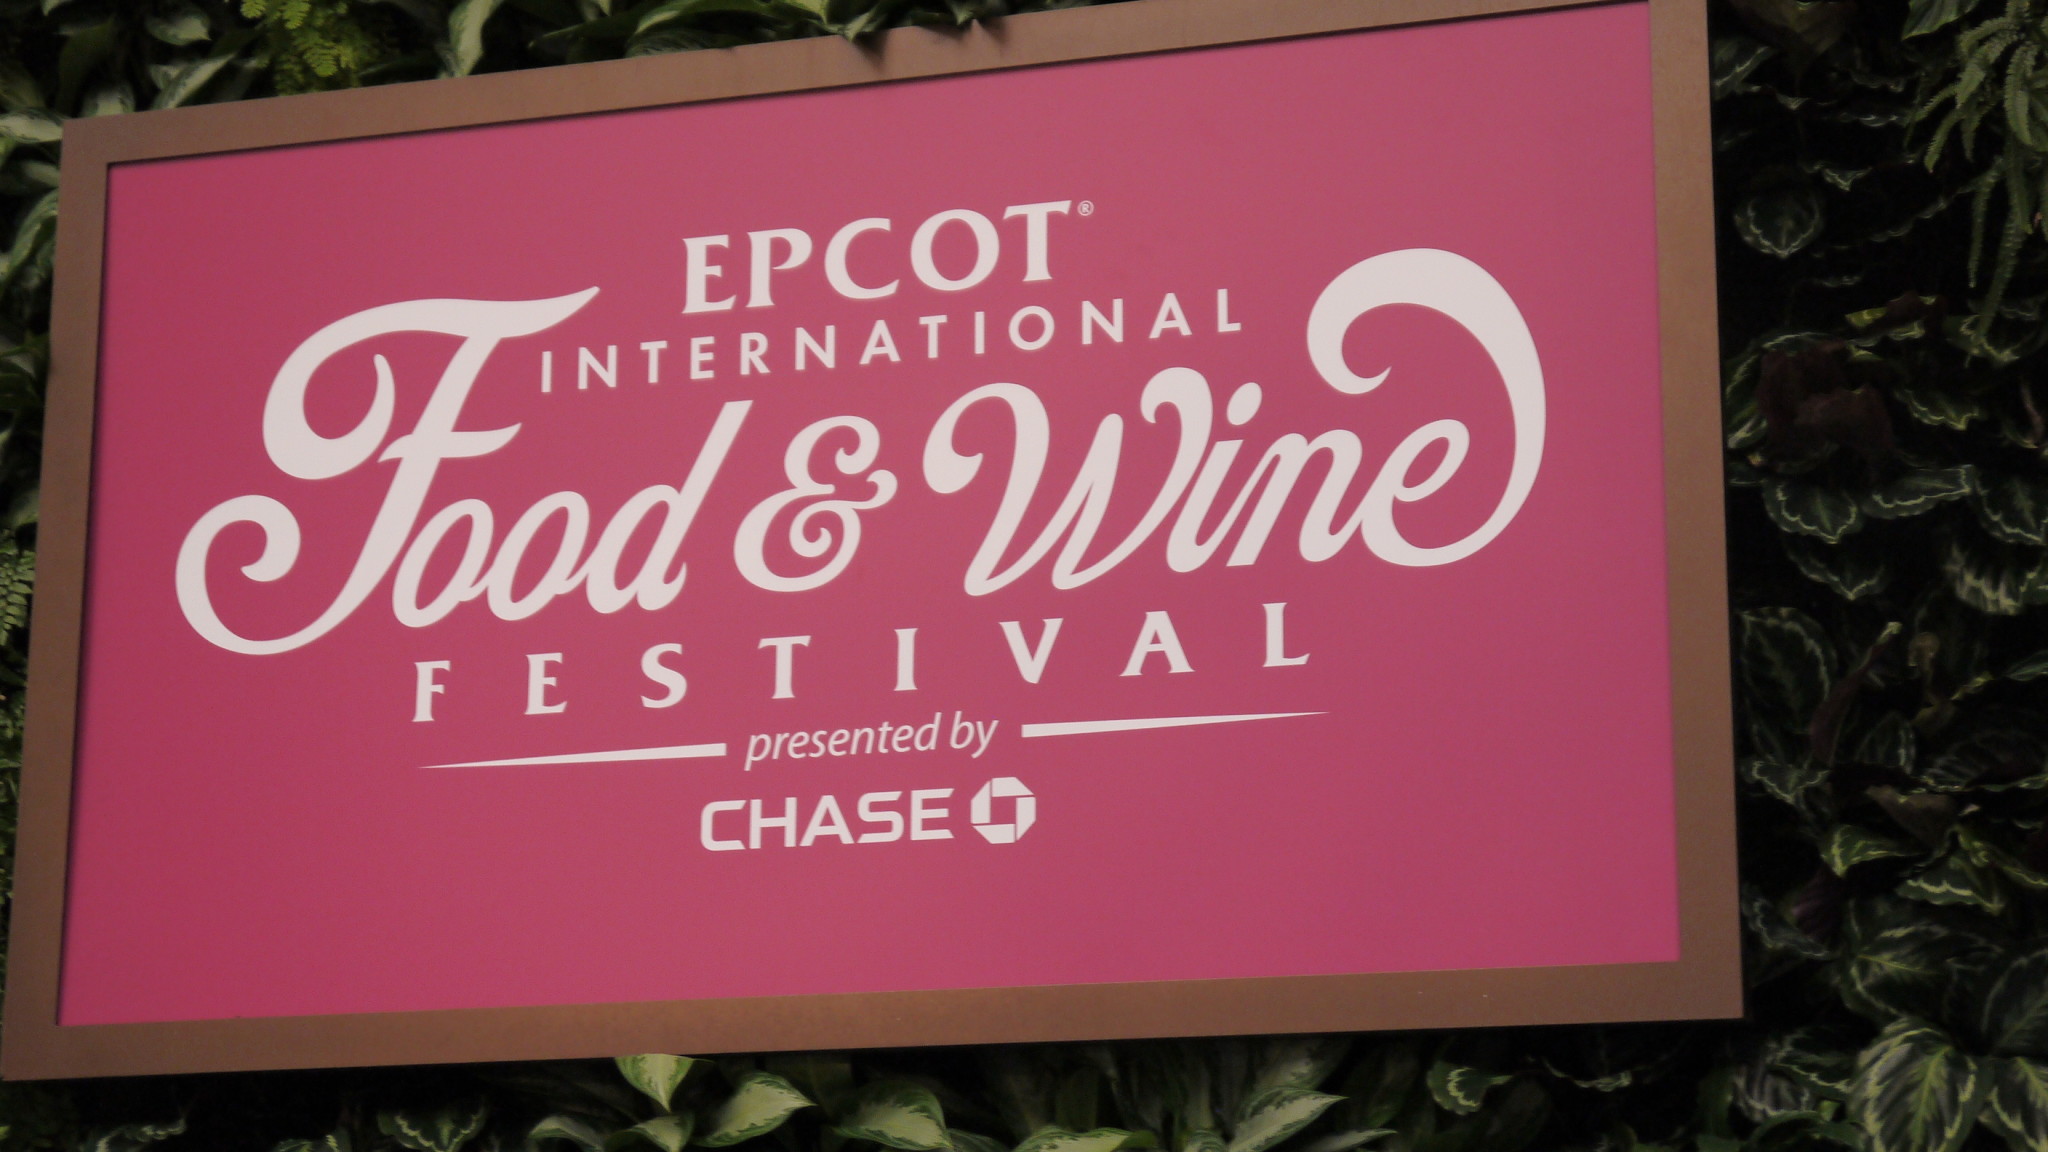 Seven Walt Disney World Downtown Disney Resort Area Hotels are Offering Special Rates During the Epcot Food & Wine Festival